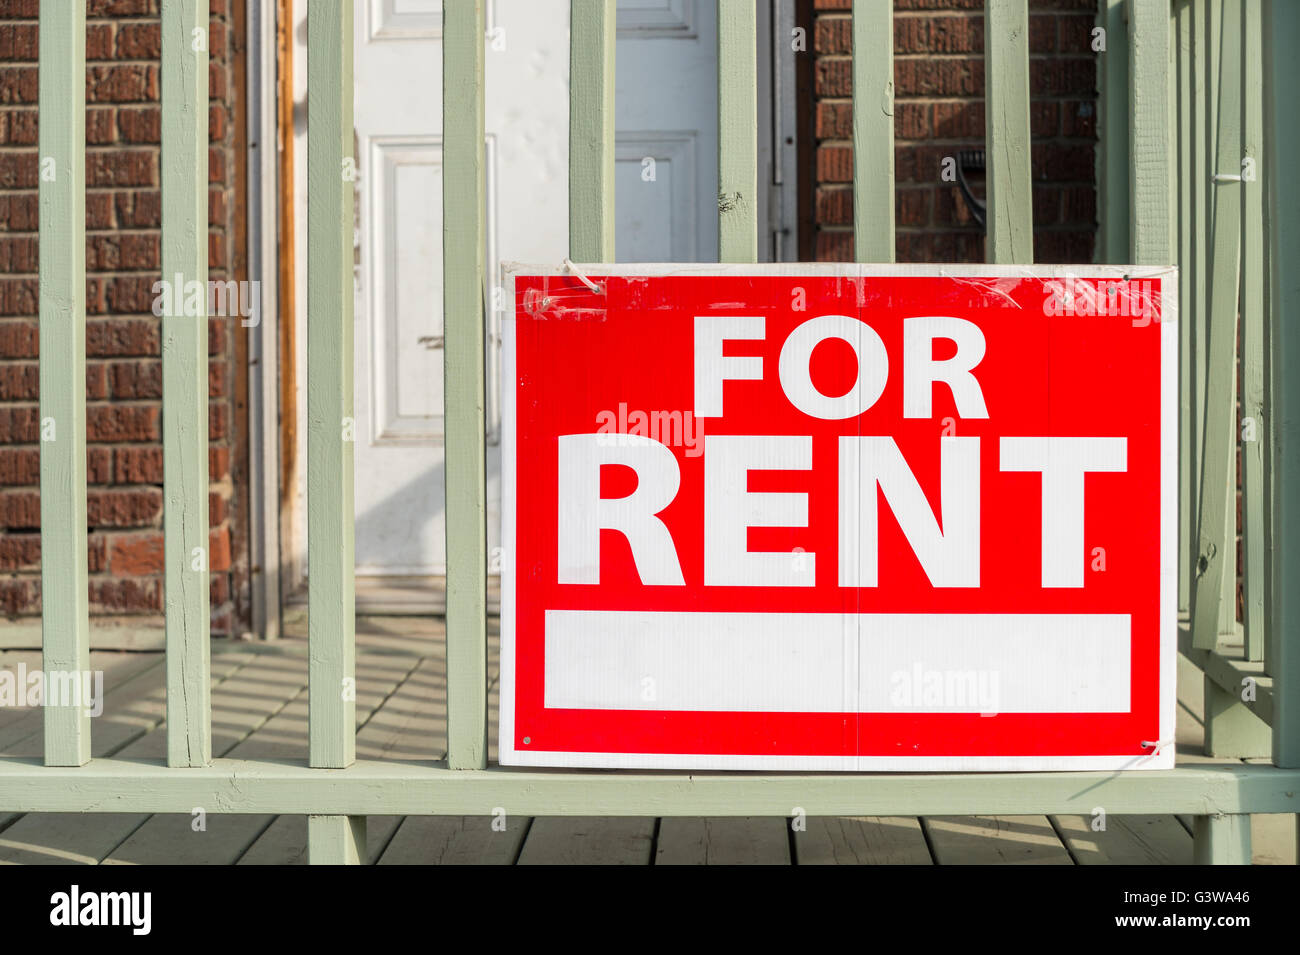 For rent sign posted in front of front porch Stock Photo